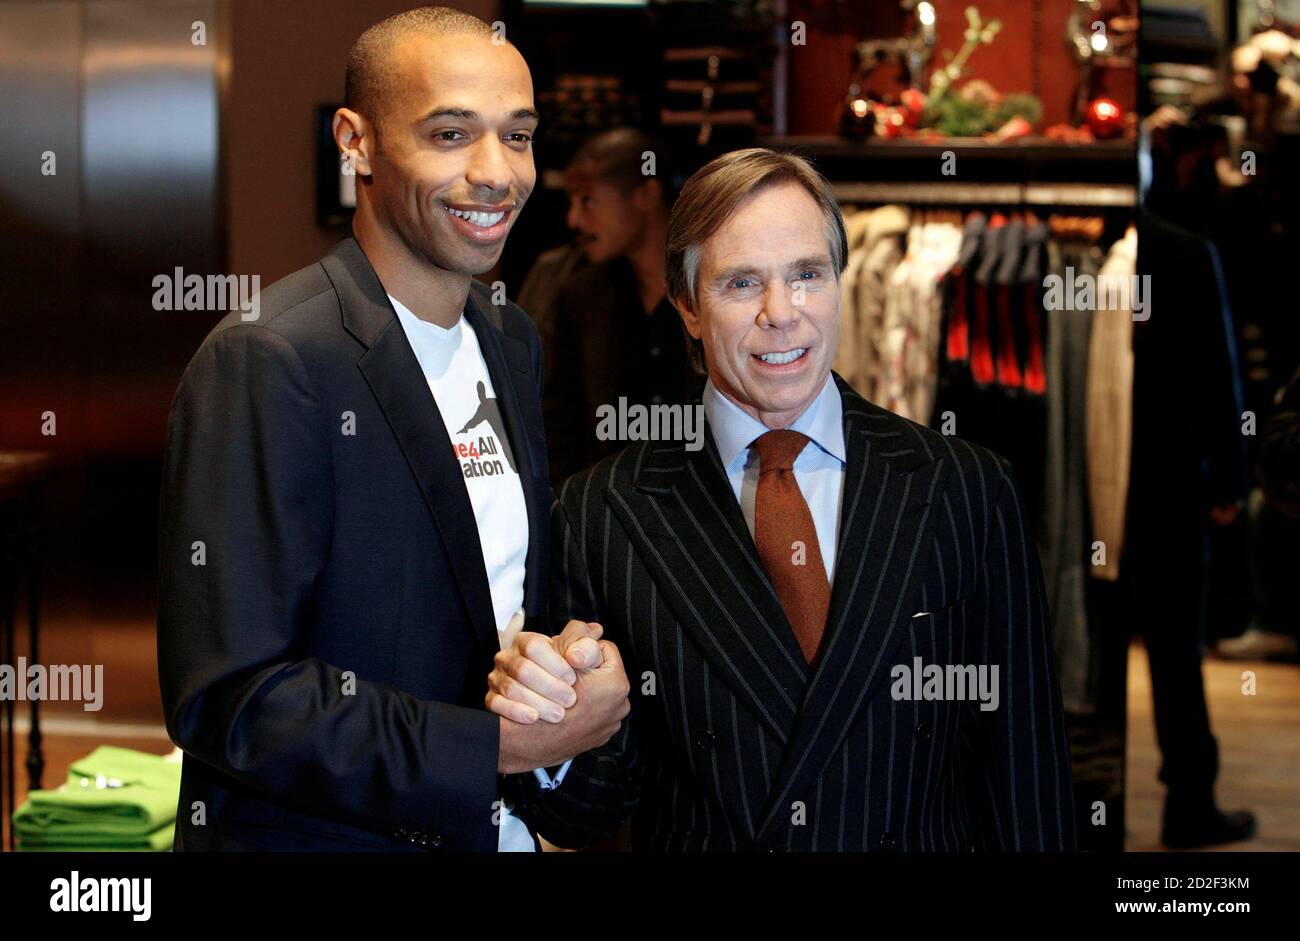 Fashion designer Tommy Hilfiger (R) and Arsenal soccer player Thierry Henry  pose for photographers during the opening of Hilfiger's new store in  central London December 5, 2006. REUTERS/Alessia Pierdomenico (BRITAIN  Stock Photo -